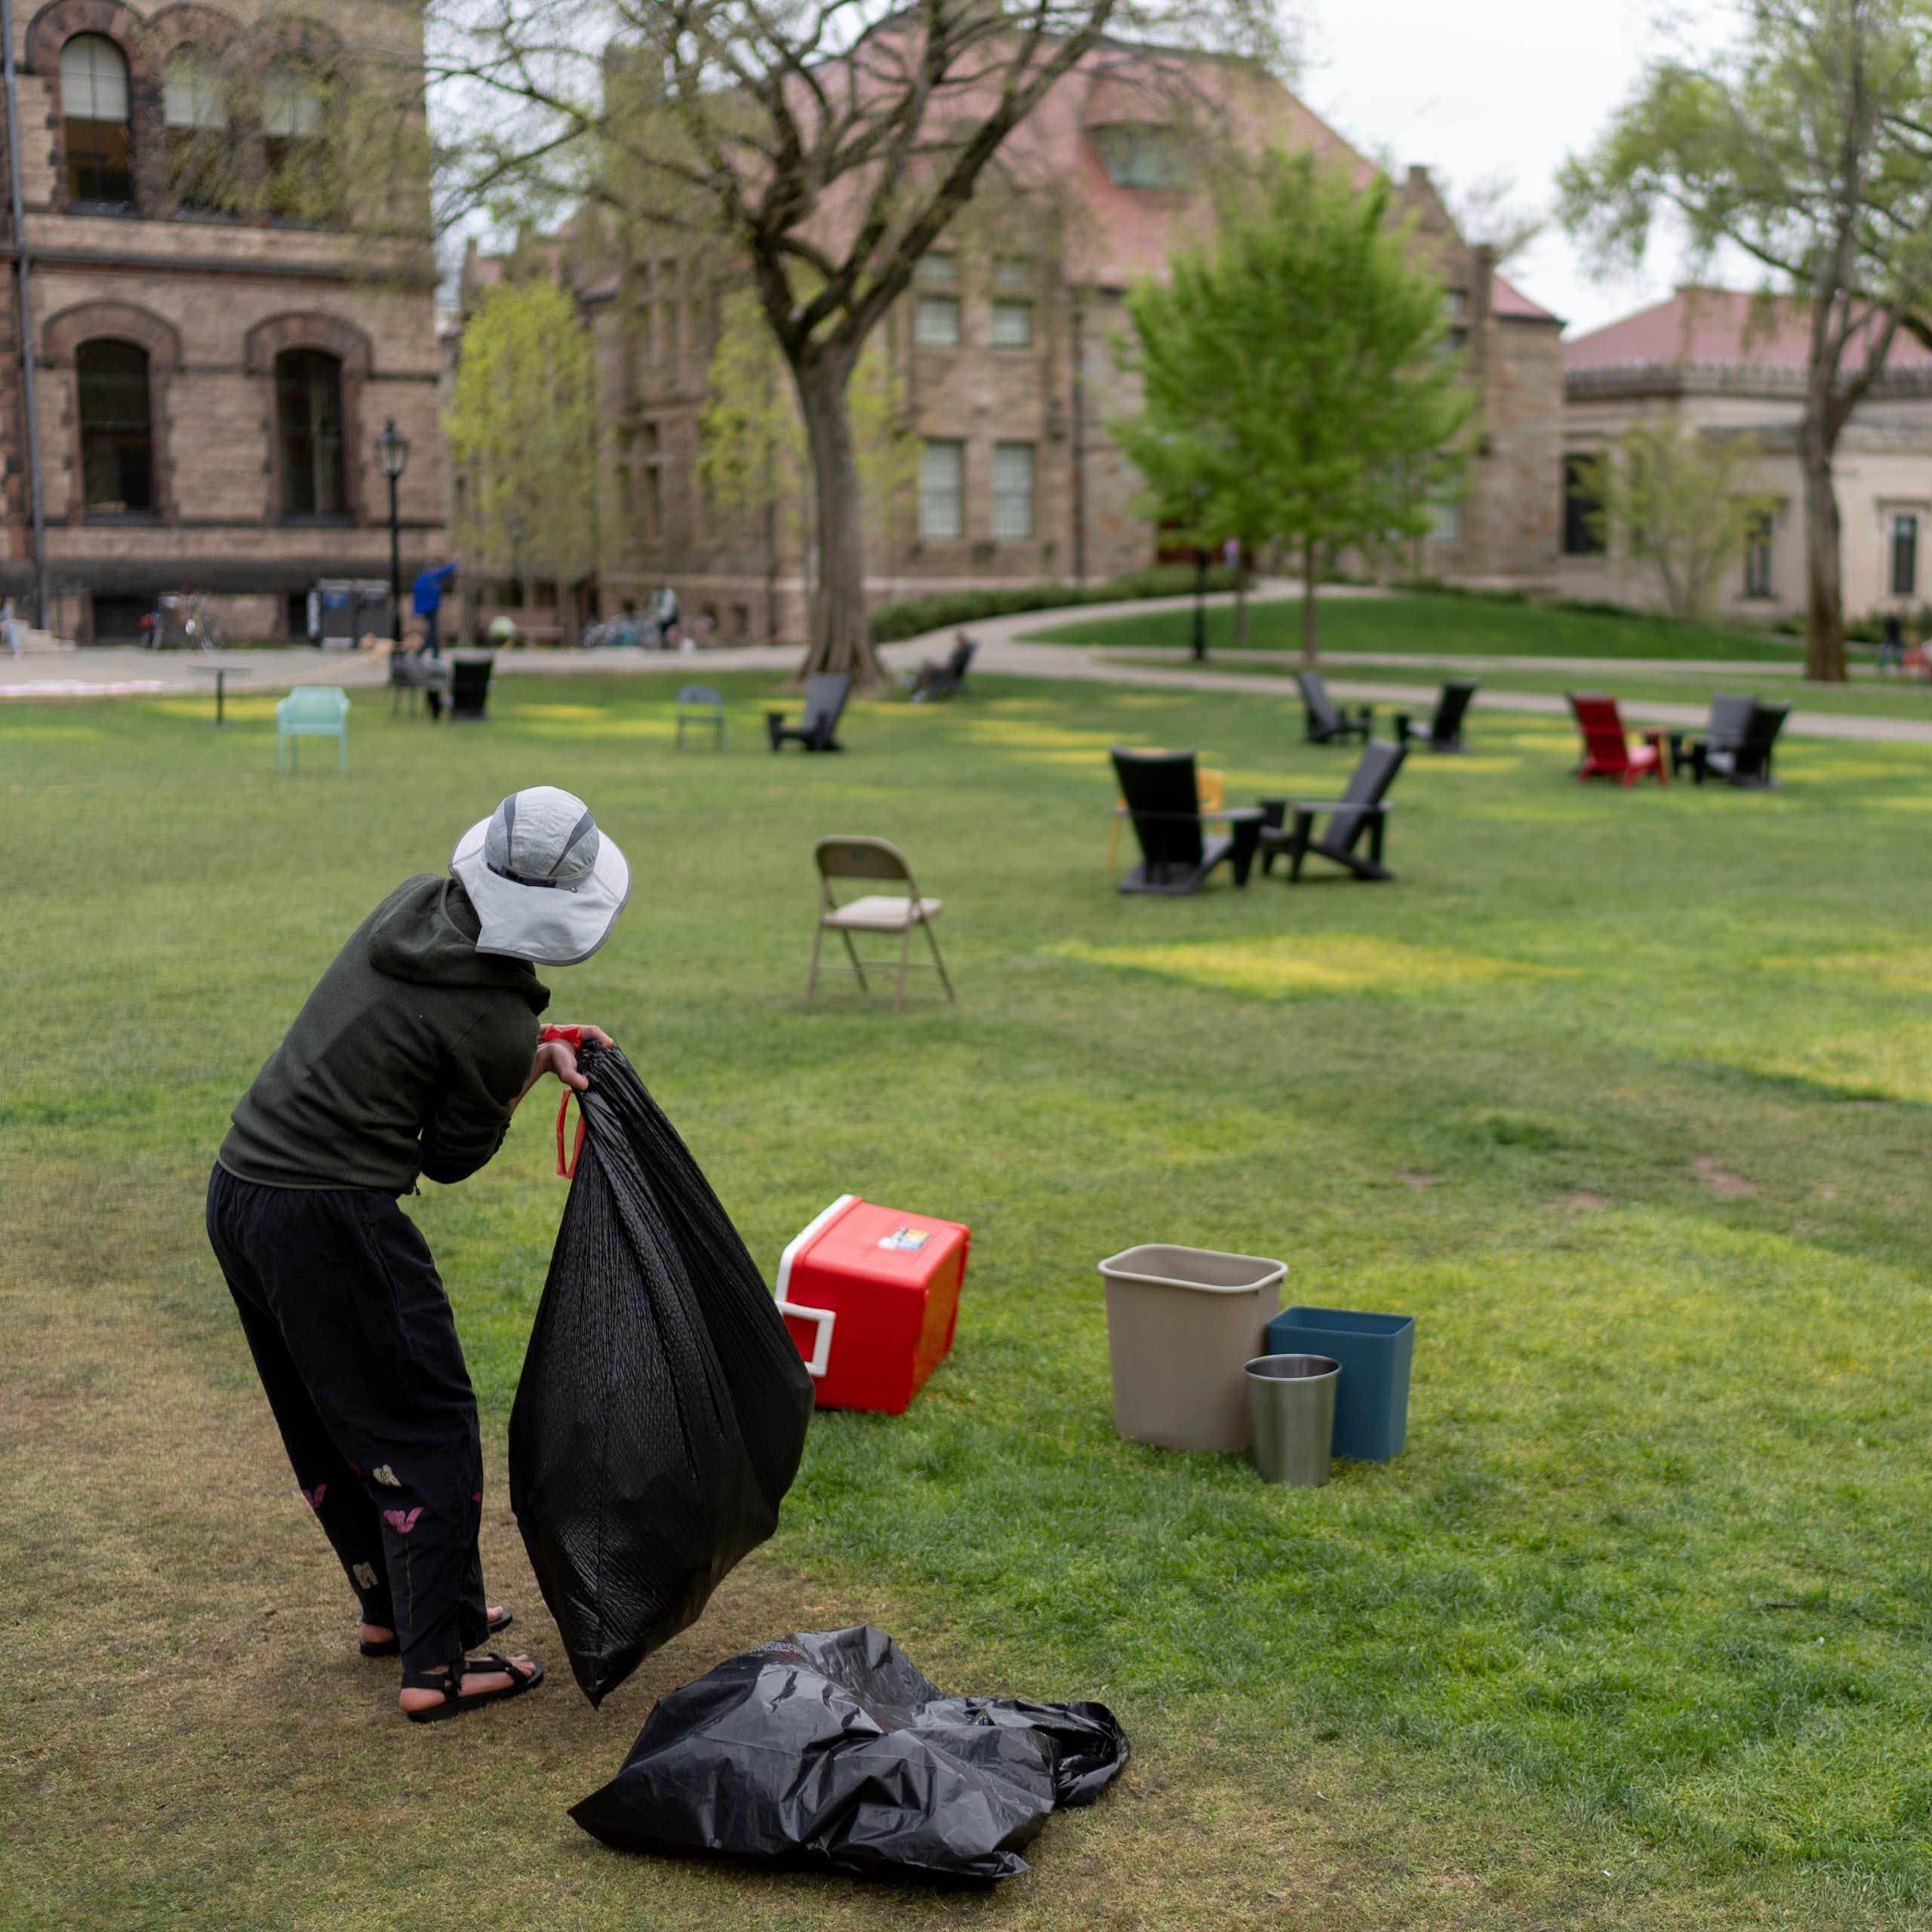 A person wearing a hat puts items in a plastic garbage bag.